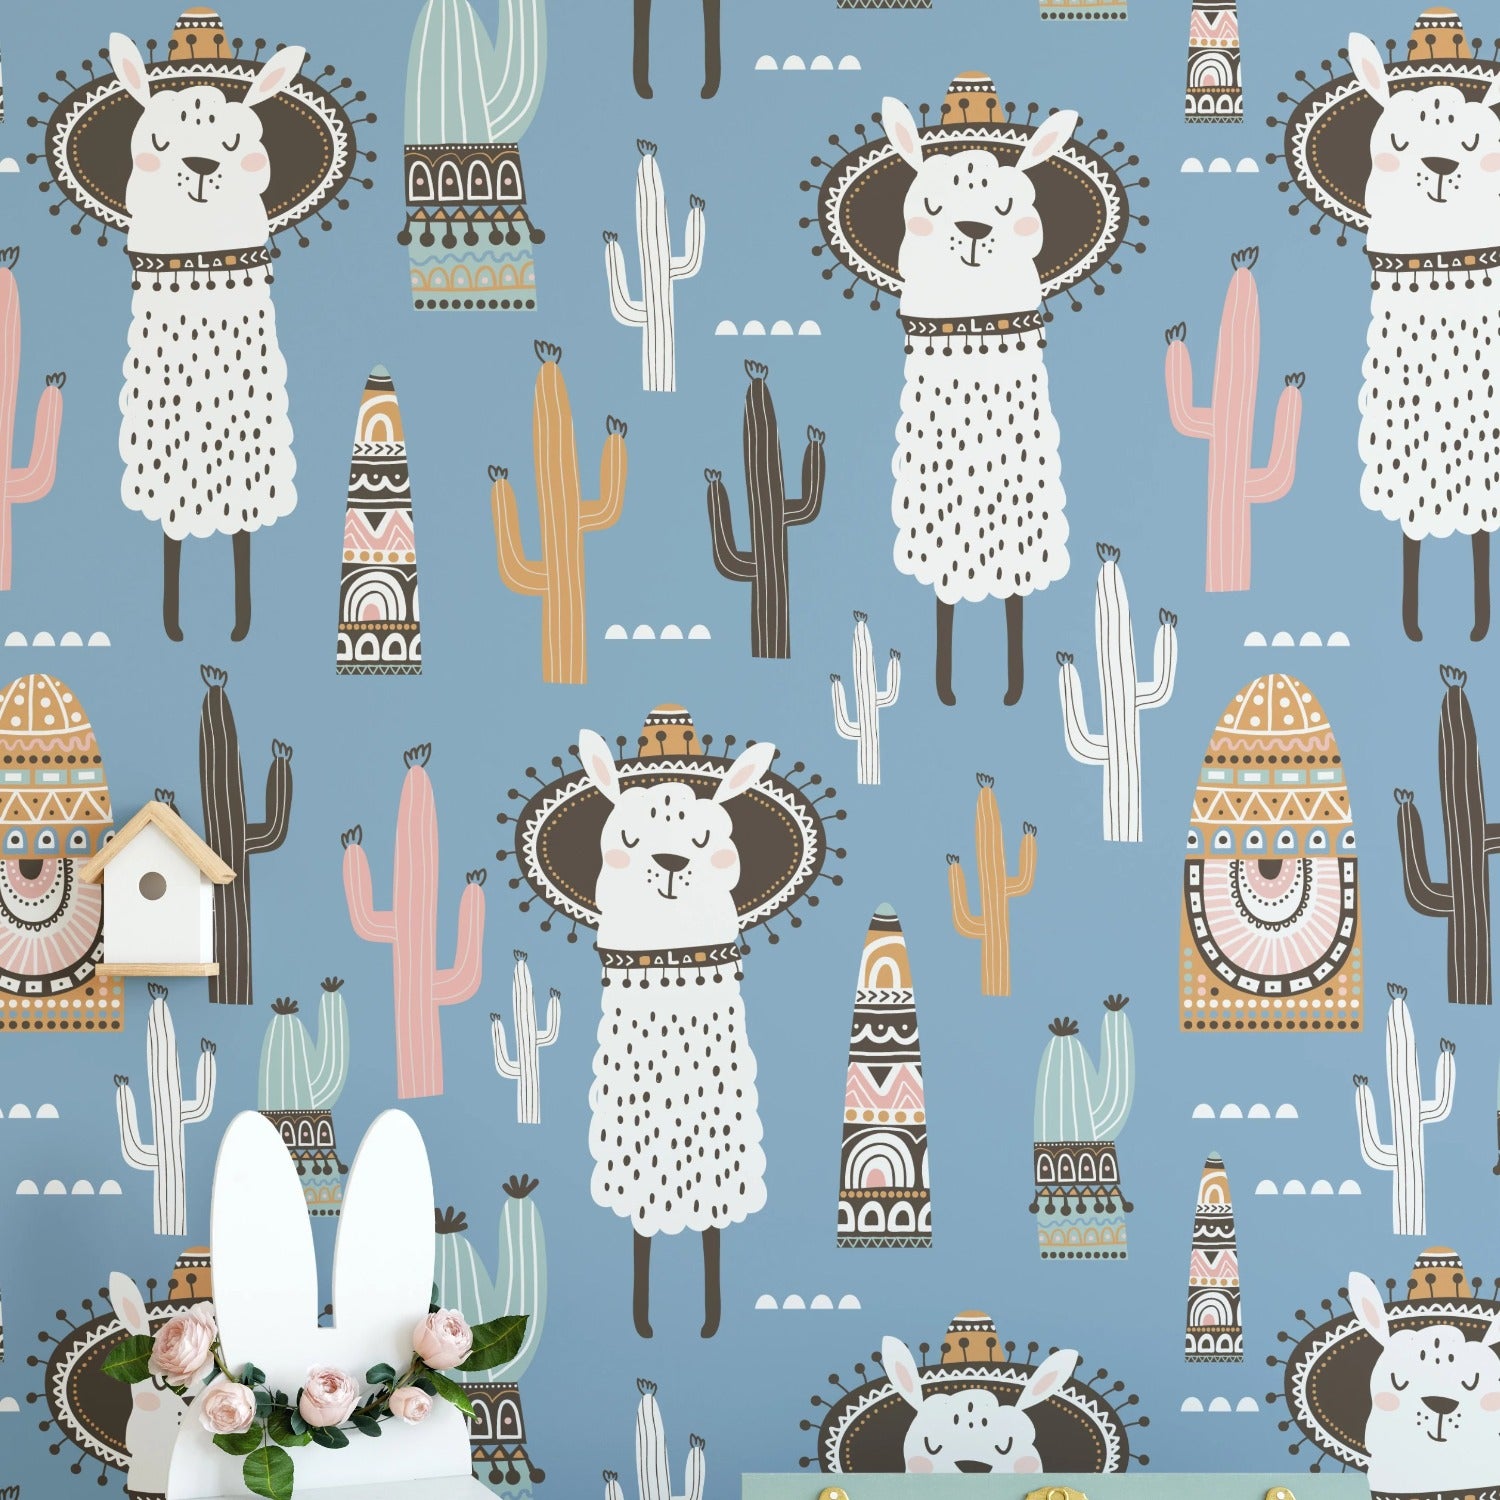 Full view of playful llama wallpaper with detailed desert-themed designs and pastel colors in a nursery.